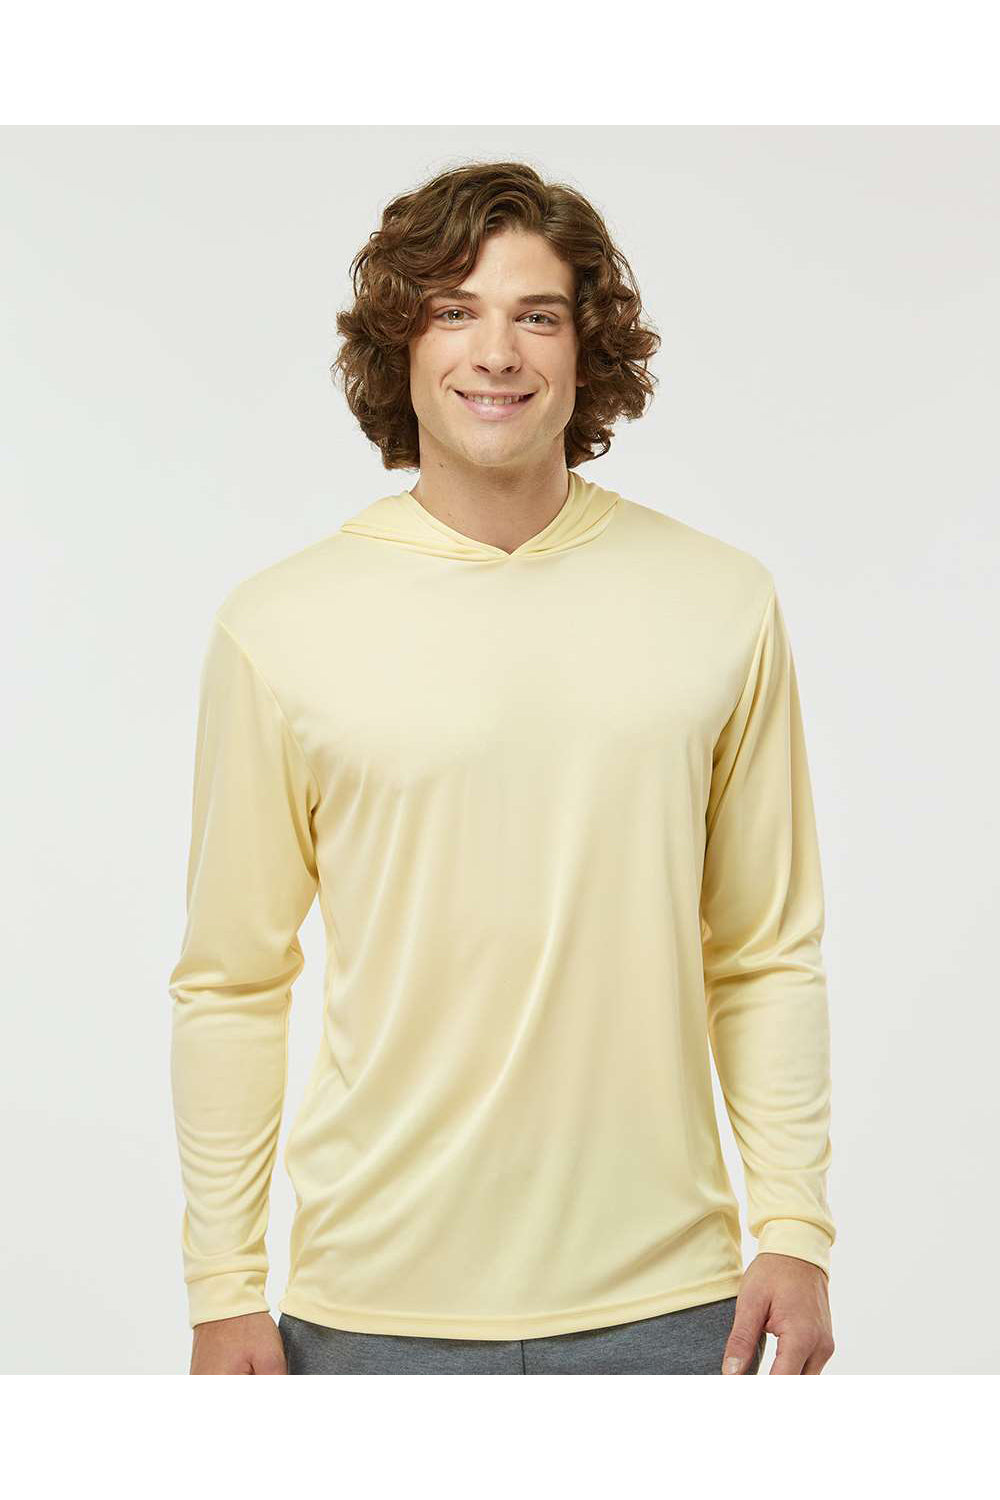 Paragon 220 Mens Bahama Performance Long Sleeve Hooded T-Shirt Hoodie Pale Yellow Model Front